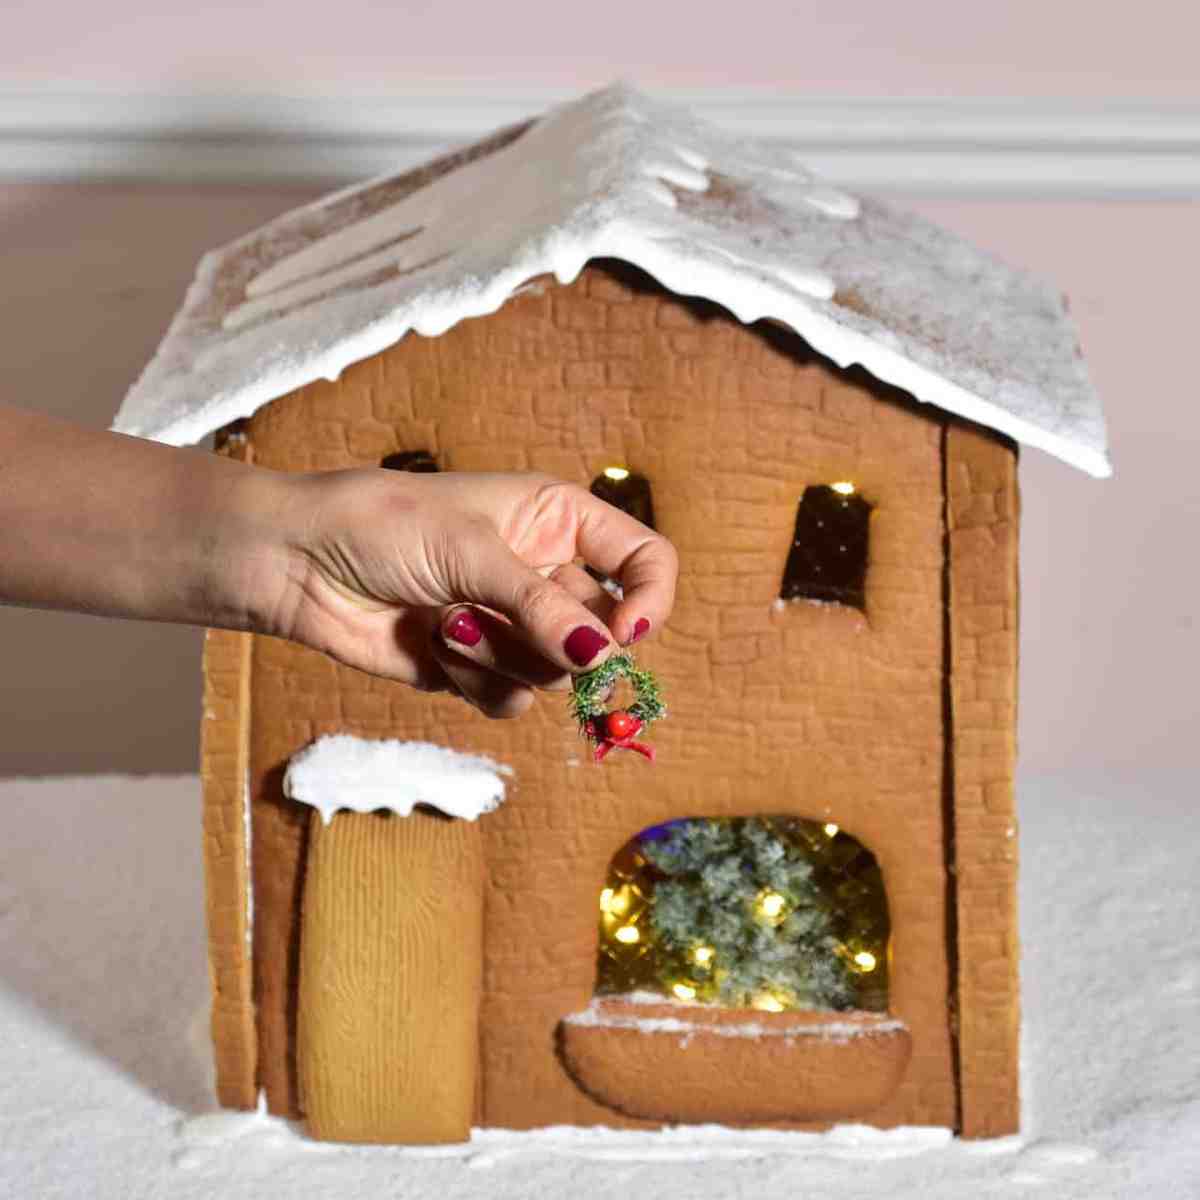 Adding a little green wreath on the gingerbread house